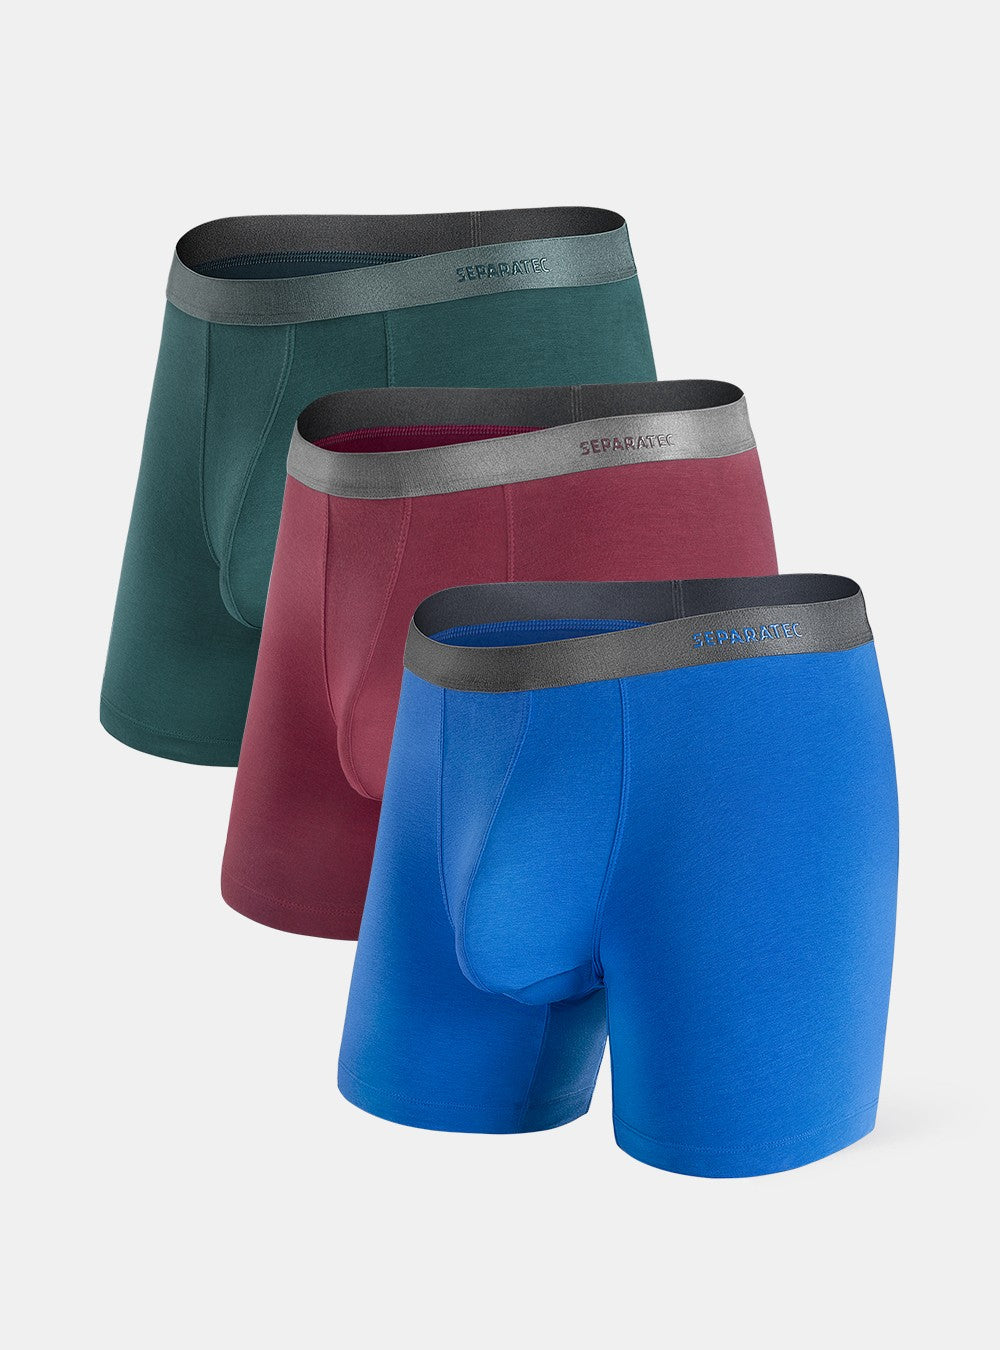 Stylish Classic Bamboo Rayon Dual Pouch Boxer Briefs 3 Pack